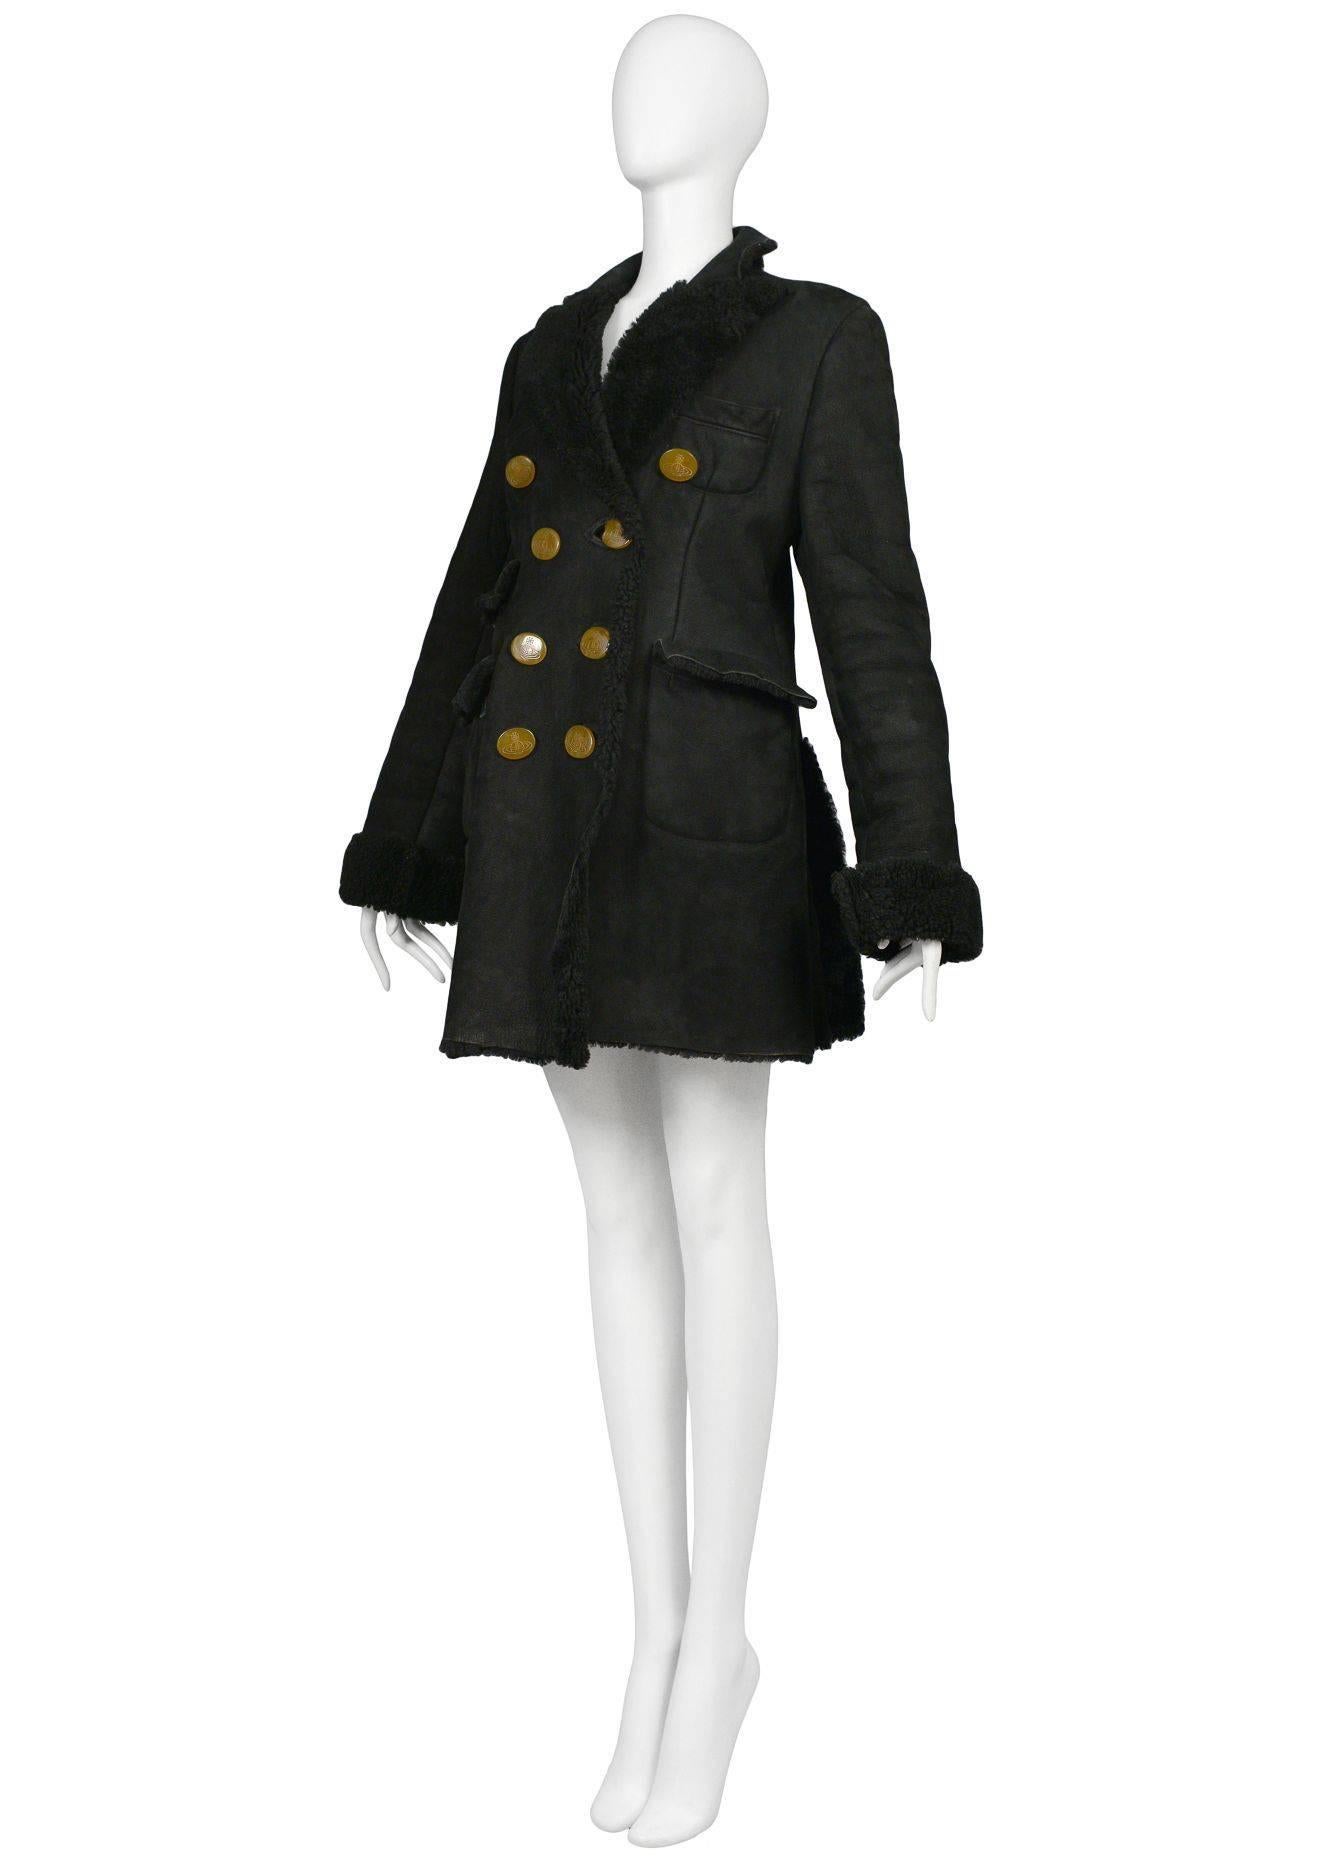 Vivienne Westwood Black Shearling Coat In Good Condition For Sale In Los Angeles, CA